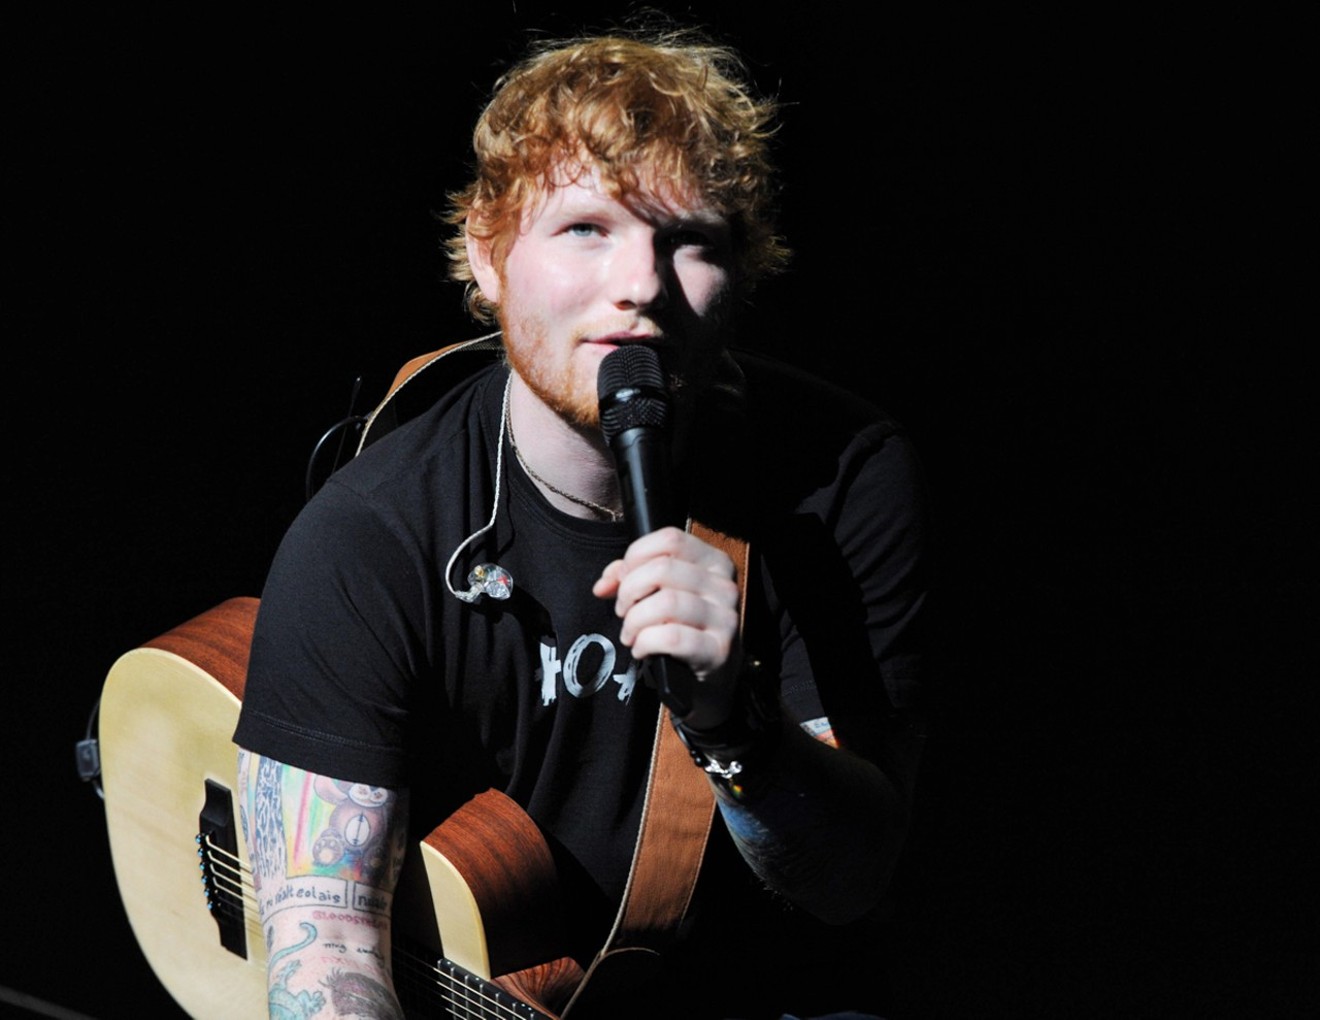 See more photos from Ed Sheeran's sold-out show at the American Airlines Arena.